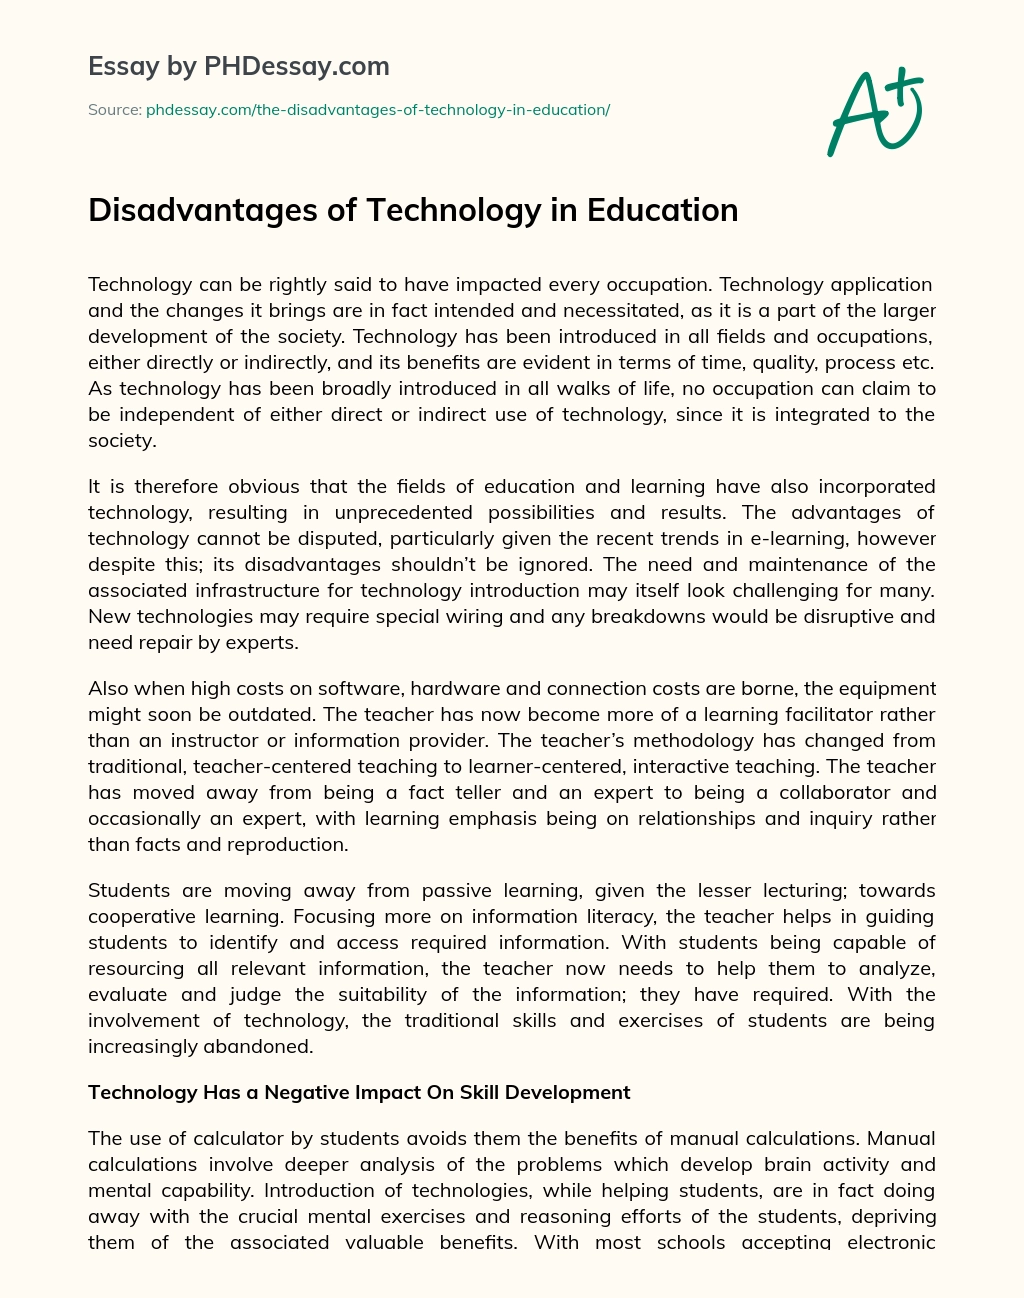 the role of technology in education essay 750 words